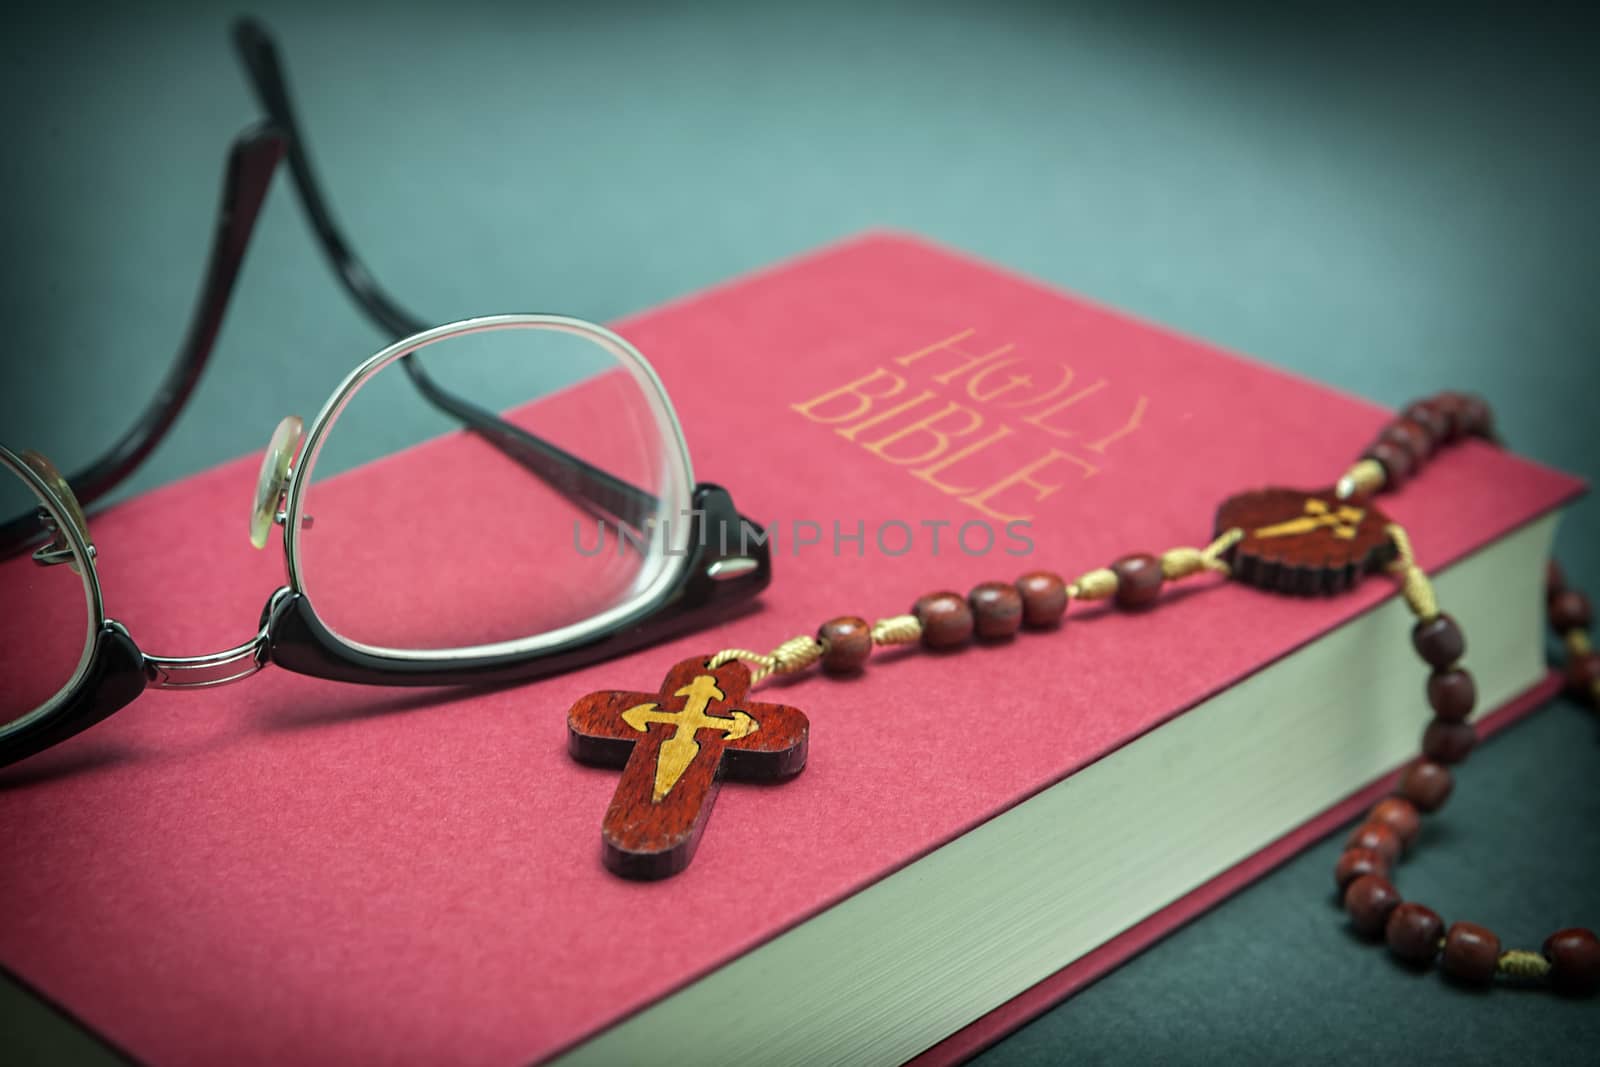 Glasses adjusted on the holy bible and beads